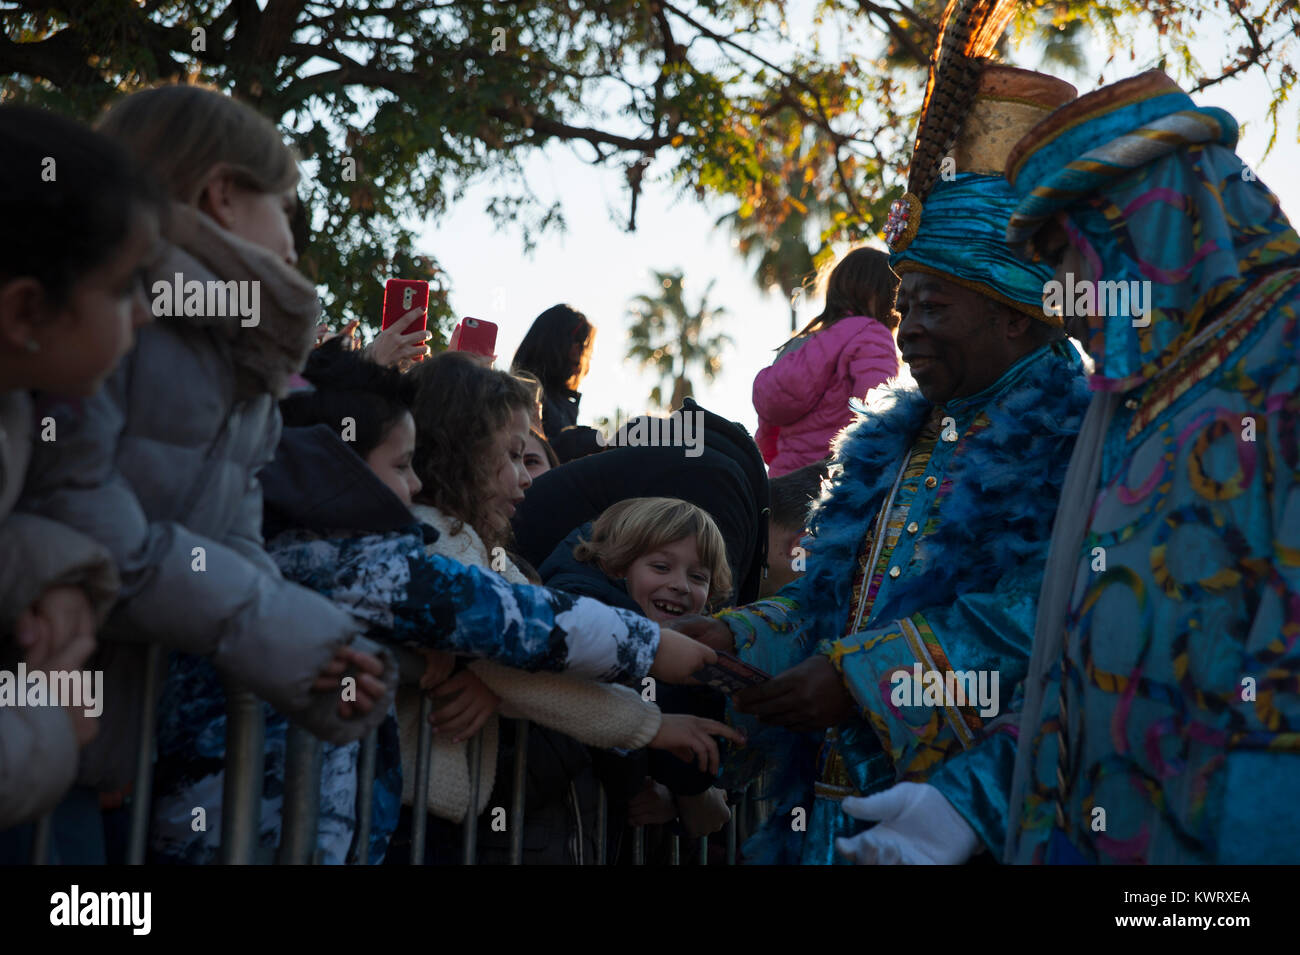 Barcelona, Spain. 5th Dec, 2018. Thousands of children await the arrival of the wise men to give them their wish letters in hand. The parade symbolizes the coming of the Magi to Bethlehem following the birth of Jesus, marked in Spain and many Latin American countries Epiphany is the day when gifts are exchanged. Credit: Charlie Perez/Alamy Live News Stock Photo